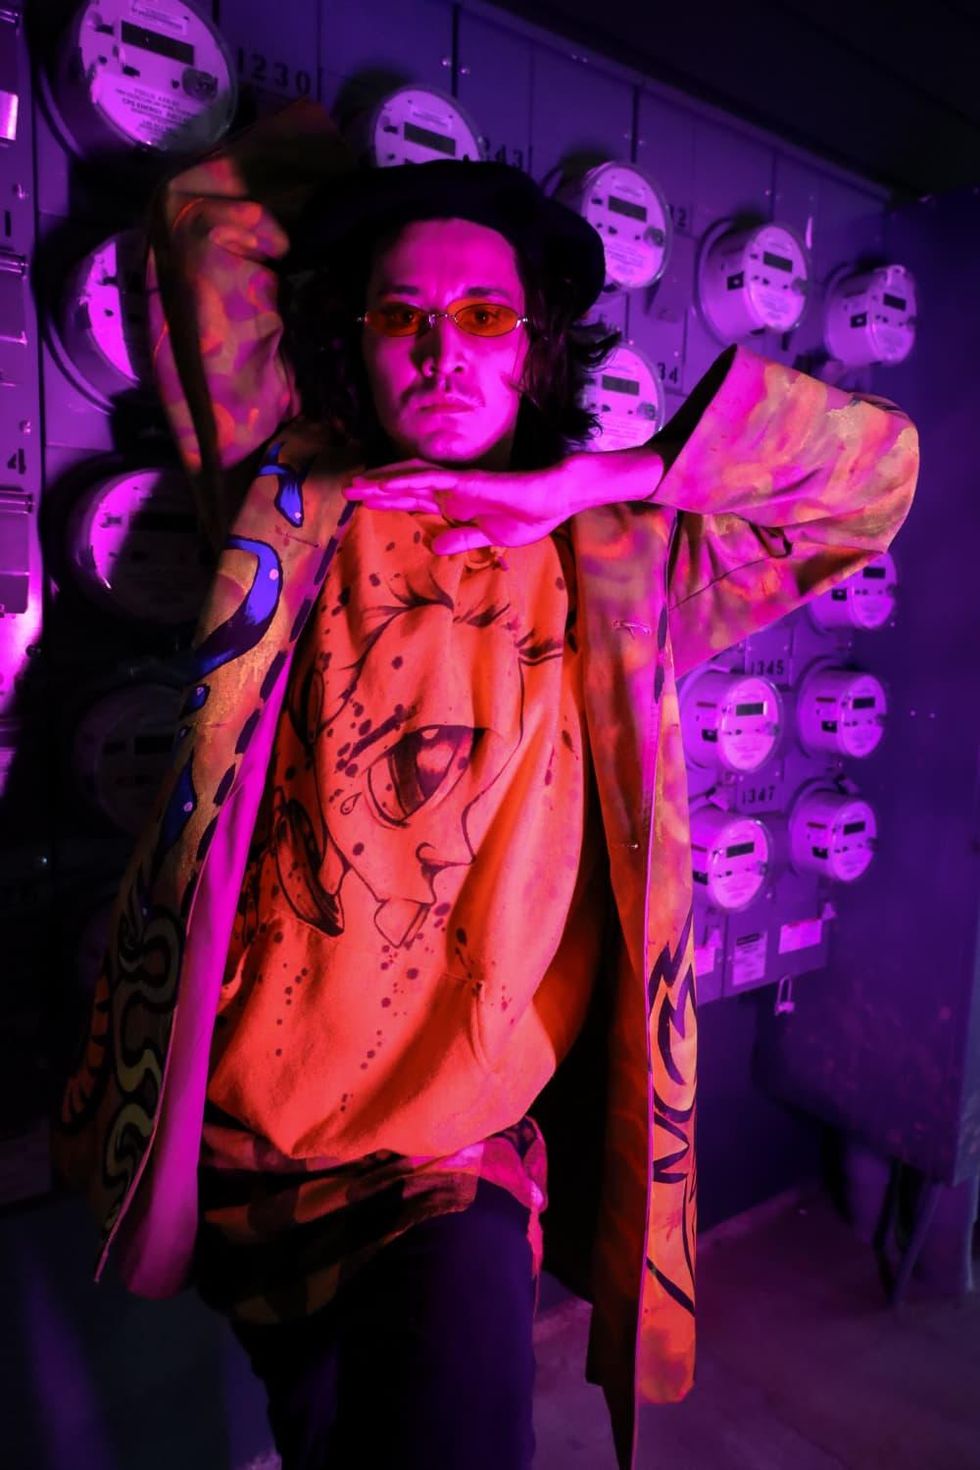 Antonio Padron, a.k.a. Akasha Luxe, poses in pink light wearing florescent patterns.